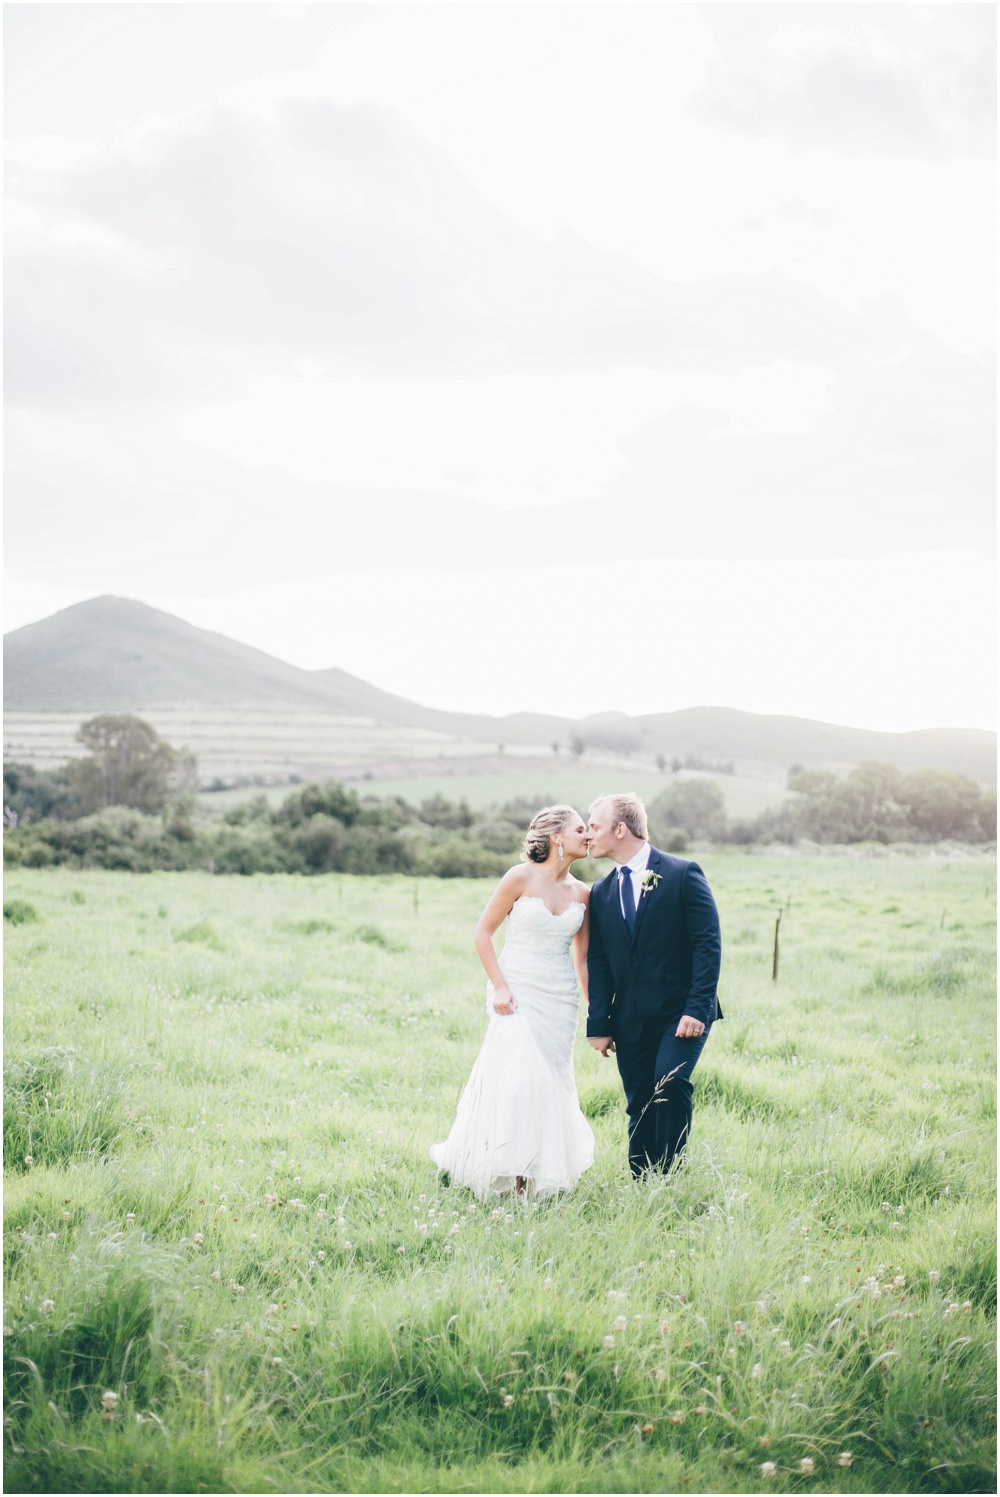 Ronel Kruger Cape Town Wedding and Lifestyle Photographer_2823.jpg